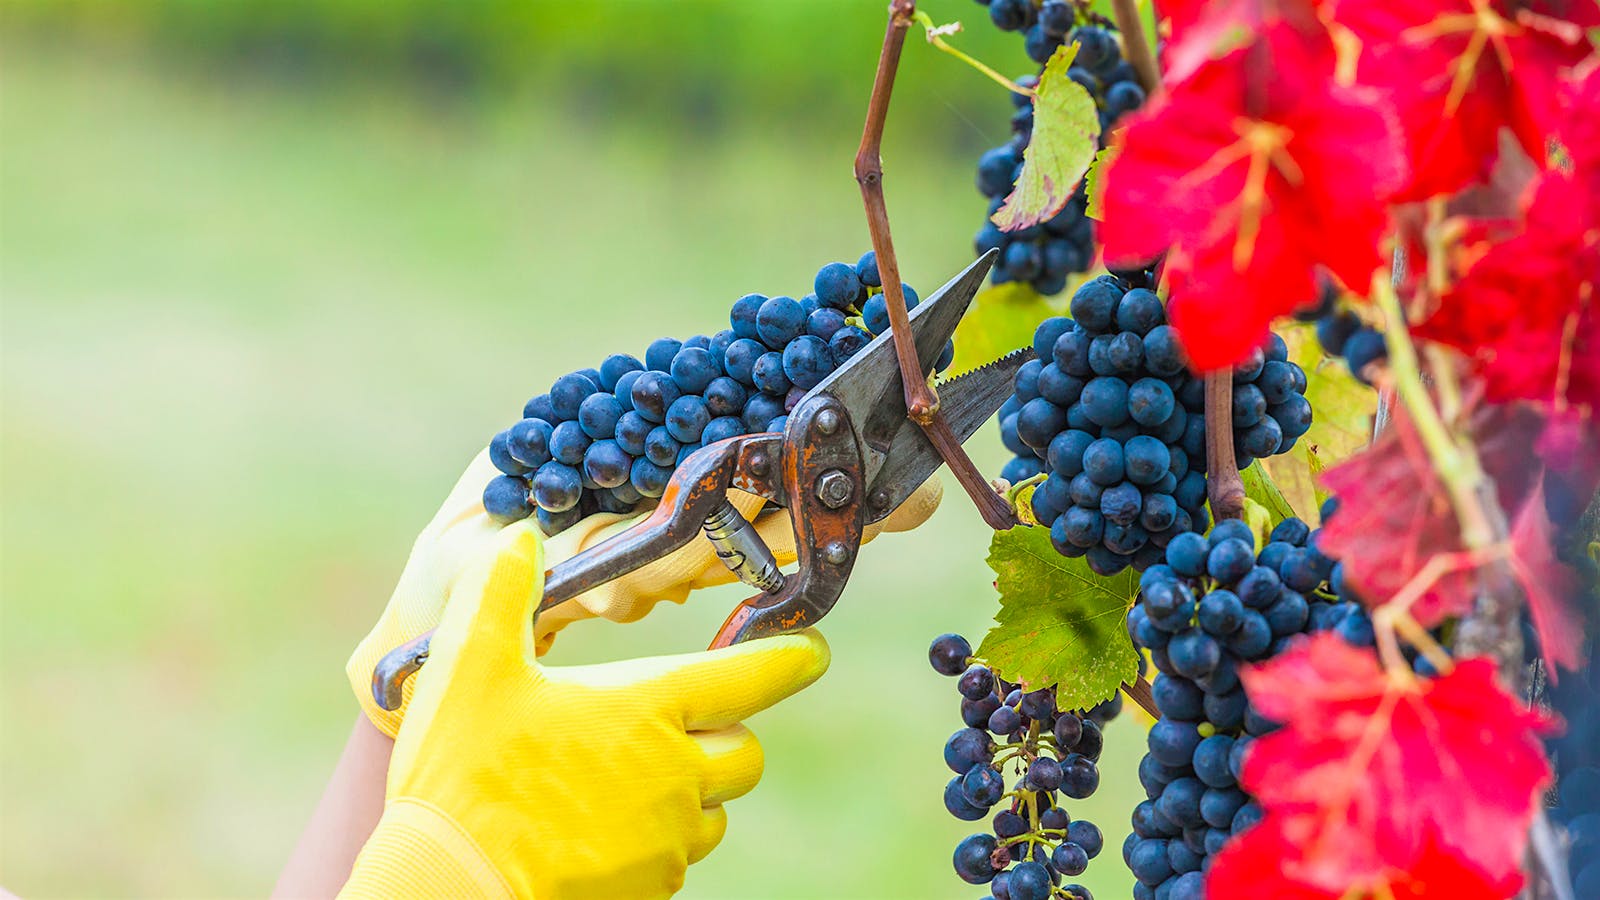 NASA and Harvard Experts Find Climate Change Has Fundamentally Altered French Wine Harvests